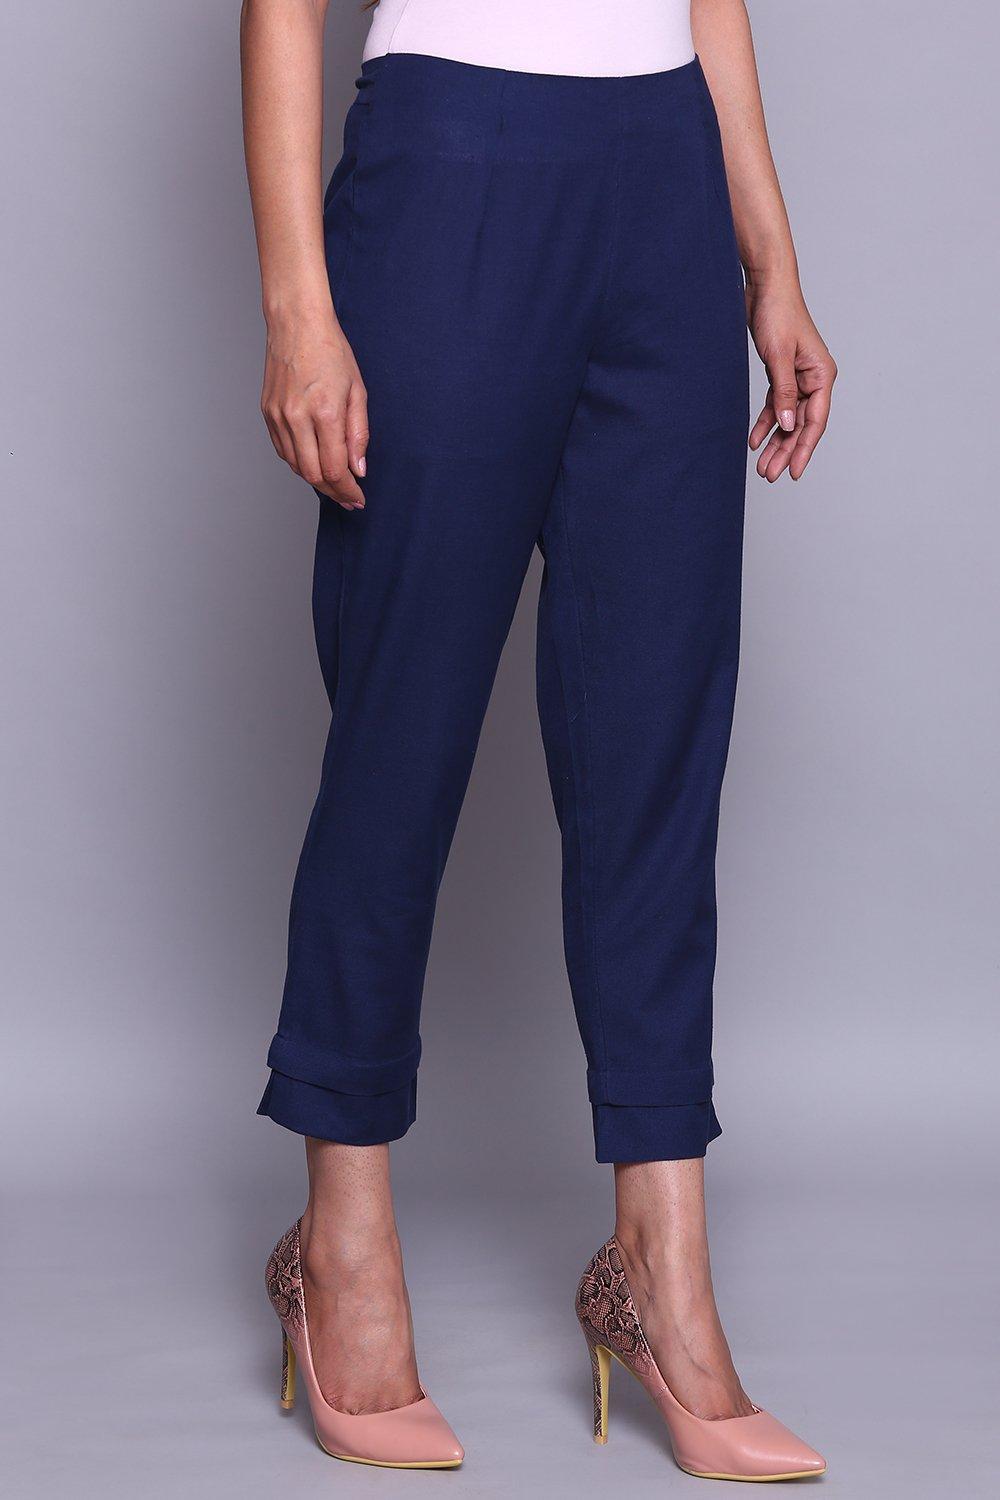 Buy Navy Cotton Slim Pants (Pants) for INR499.50